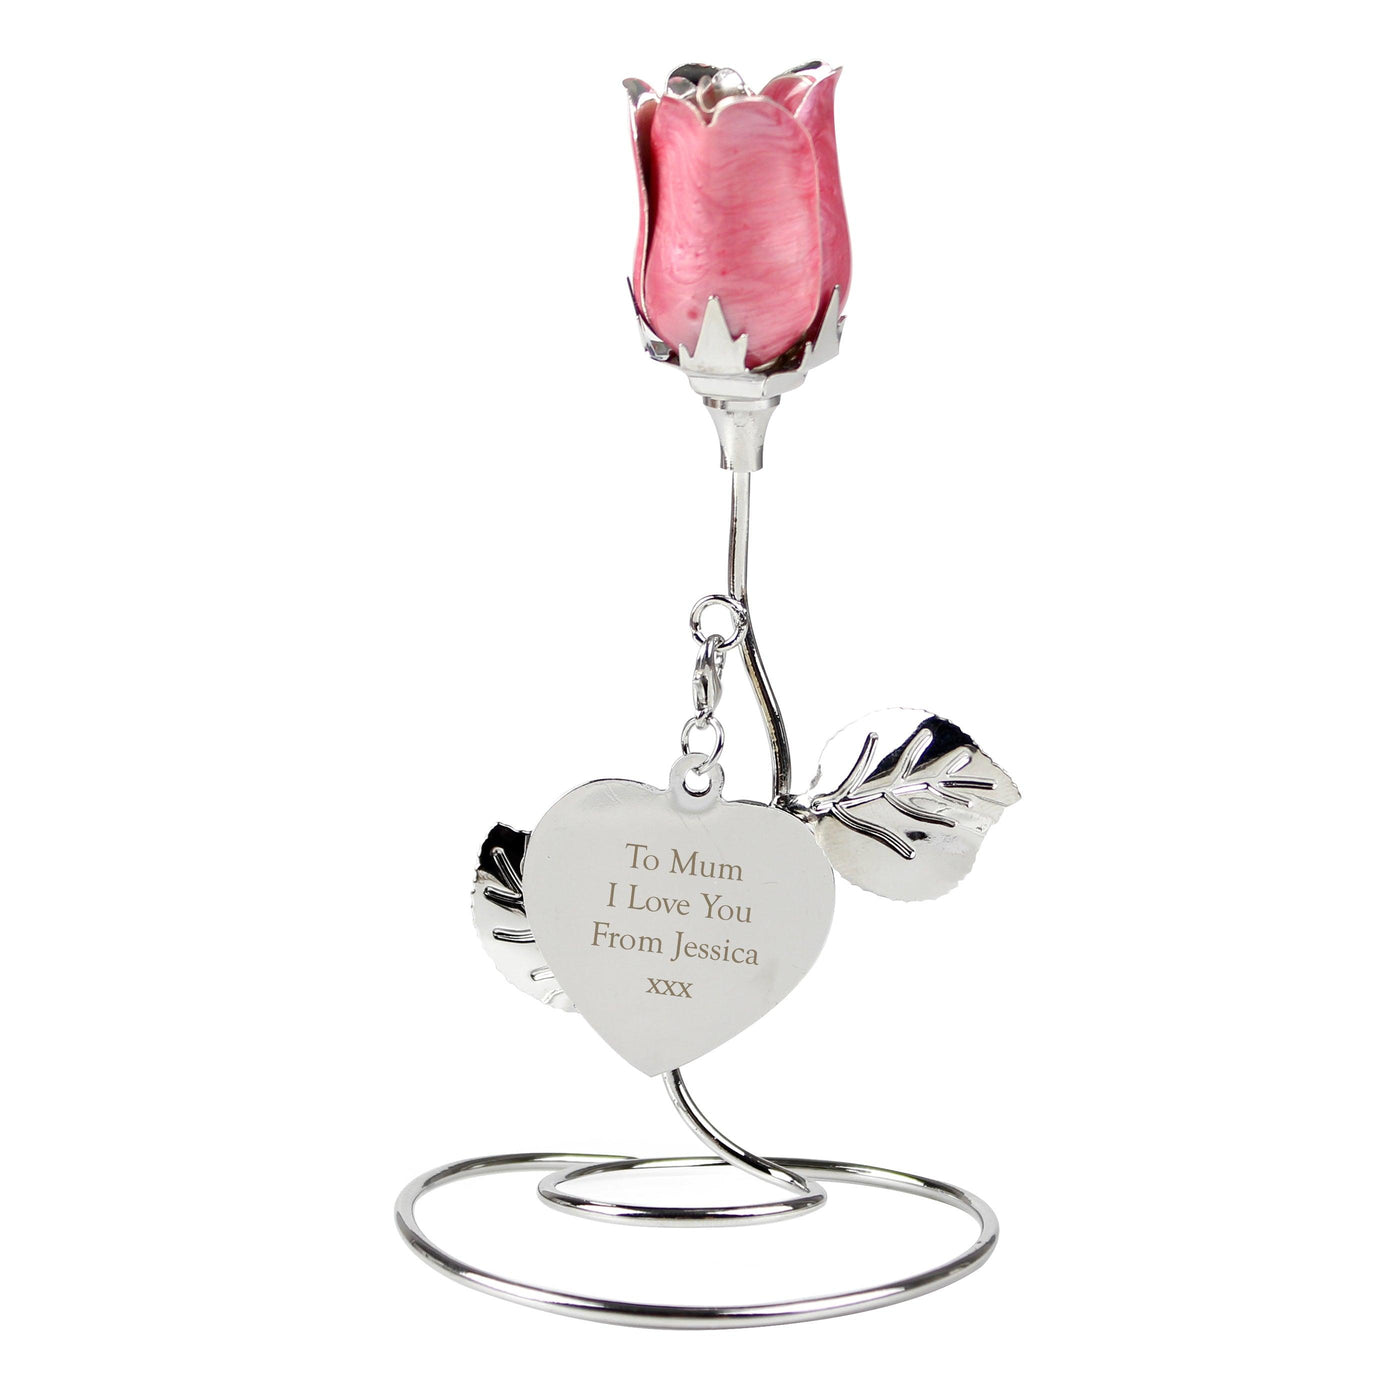 Personalised Free Text Pink Rose Bud Ornament - Shop Personalised Gifts